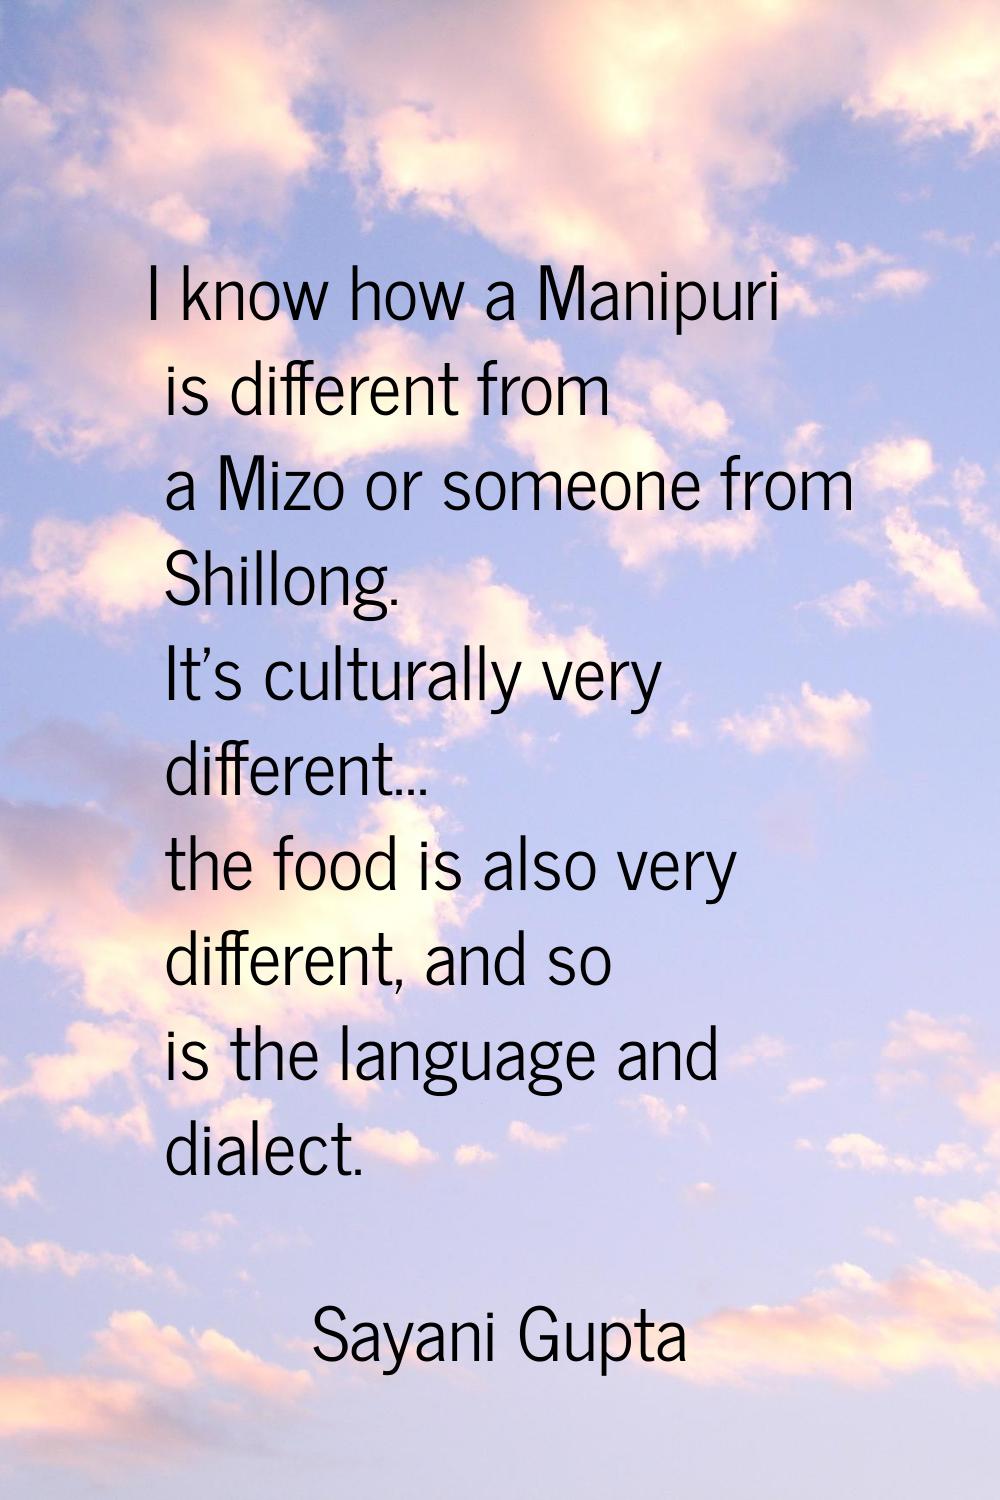 I know how a Manipuri is different from a Mizo or someone from Shillong. It's culturally very diffe